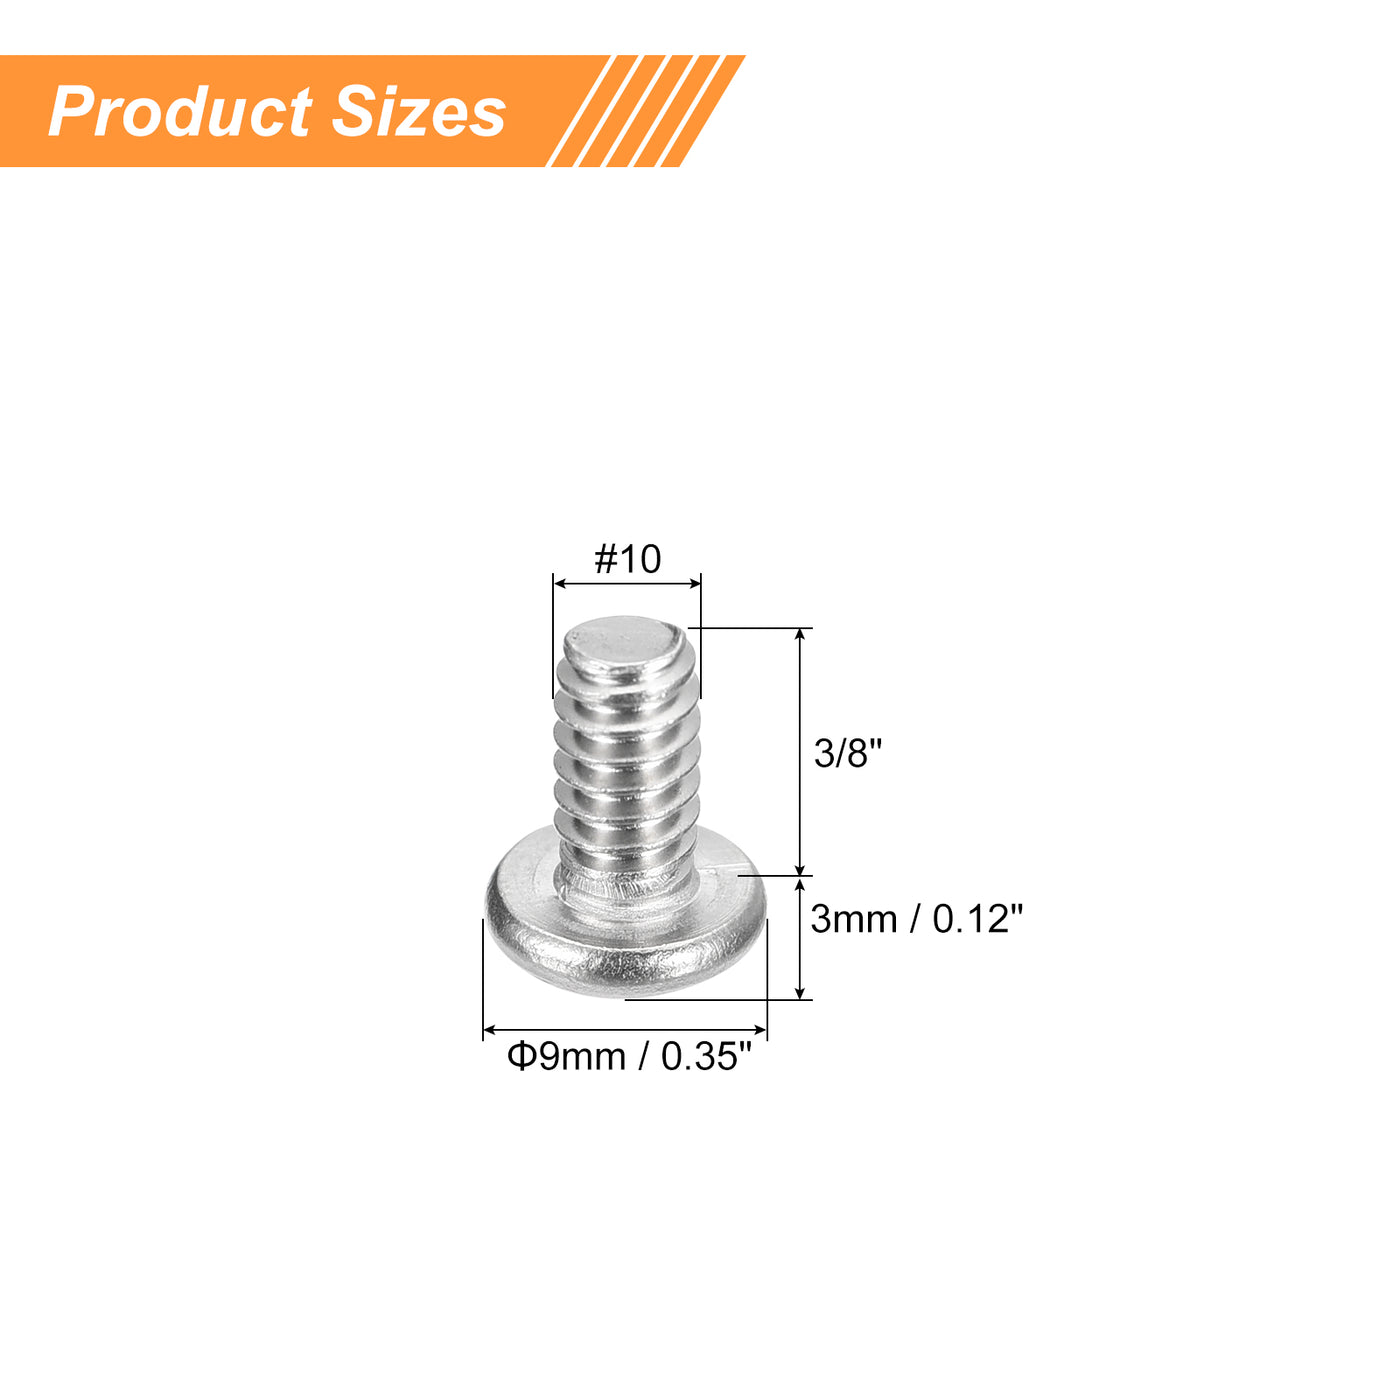 uxcell Uxcell #10-24x3/8" Pan Head Machine Screws, Stainless Steel 18-8 Screw, Pack of 50